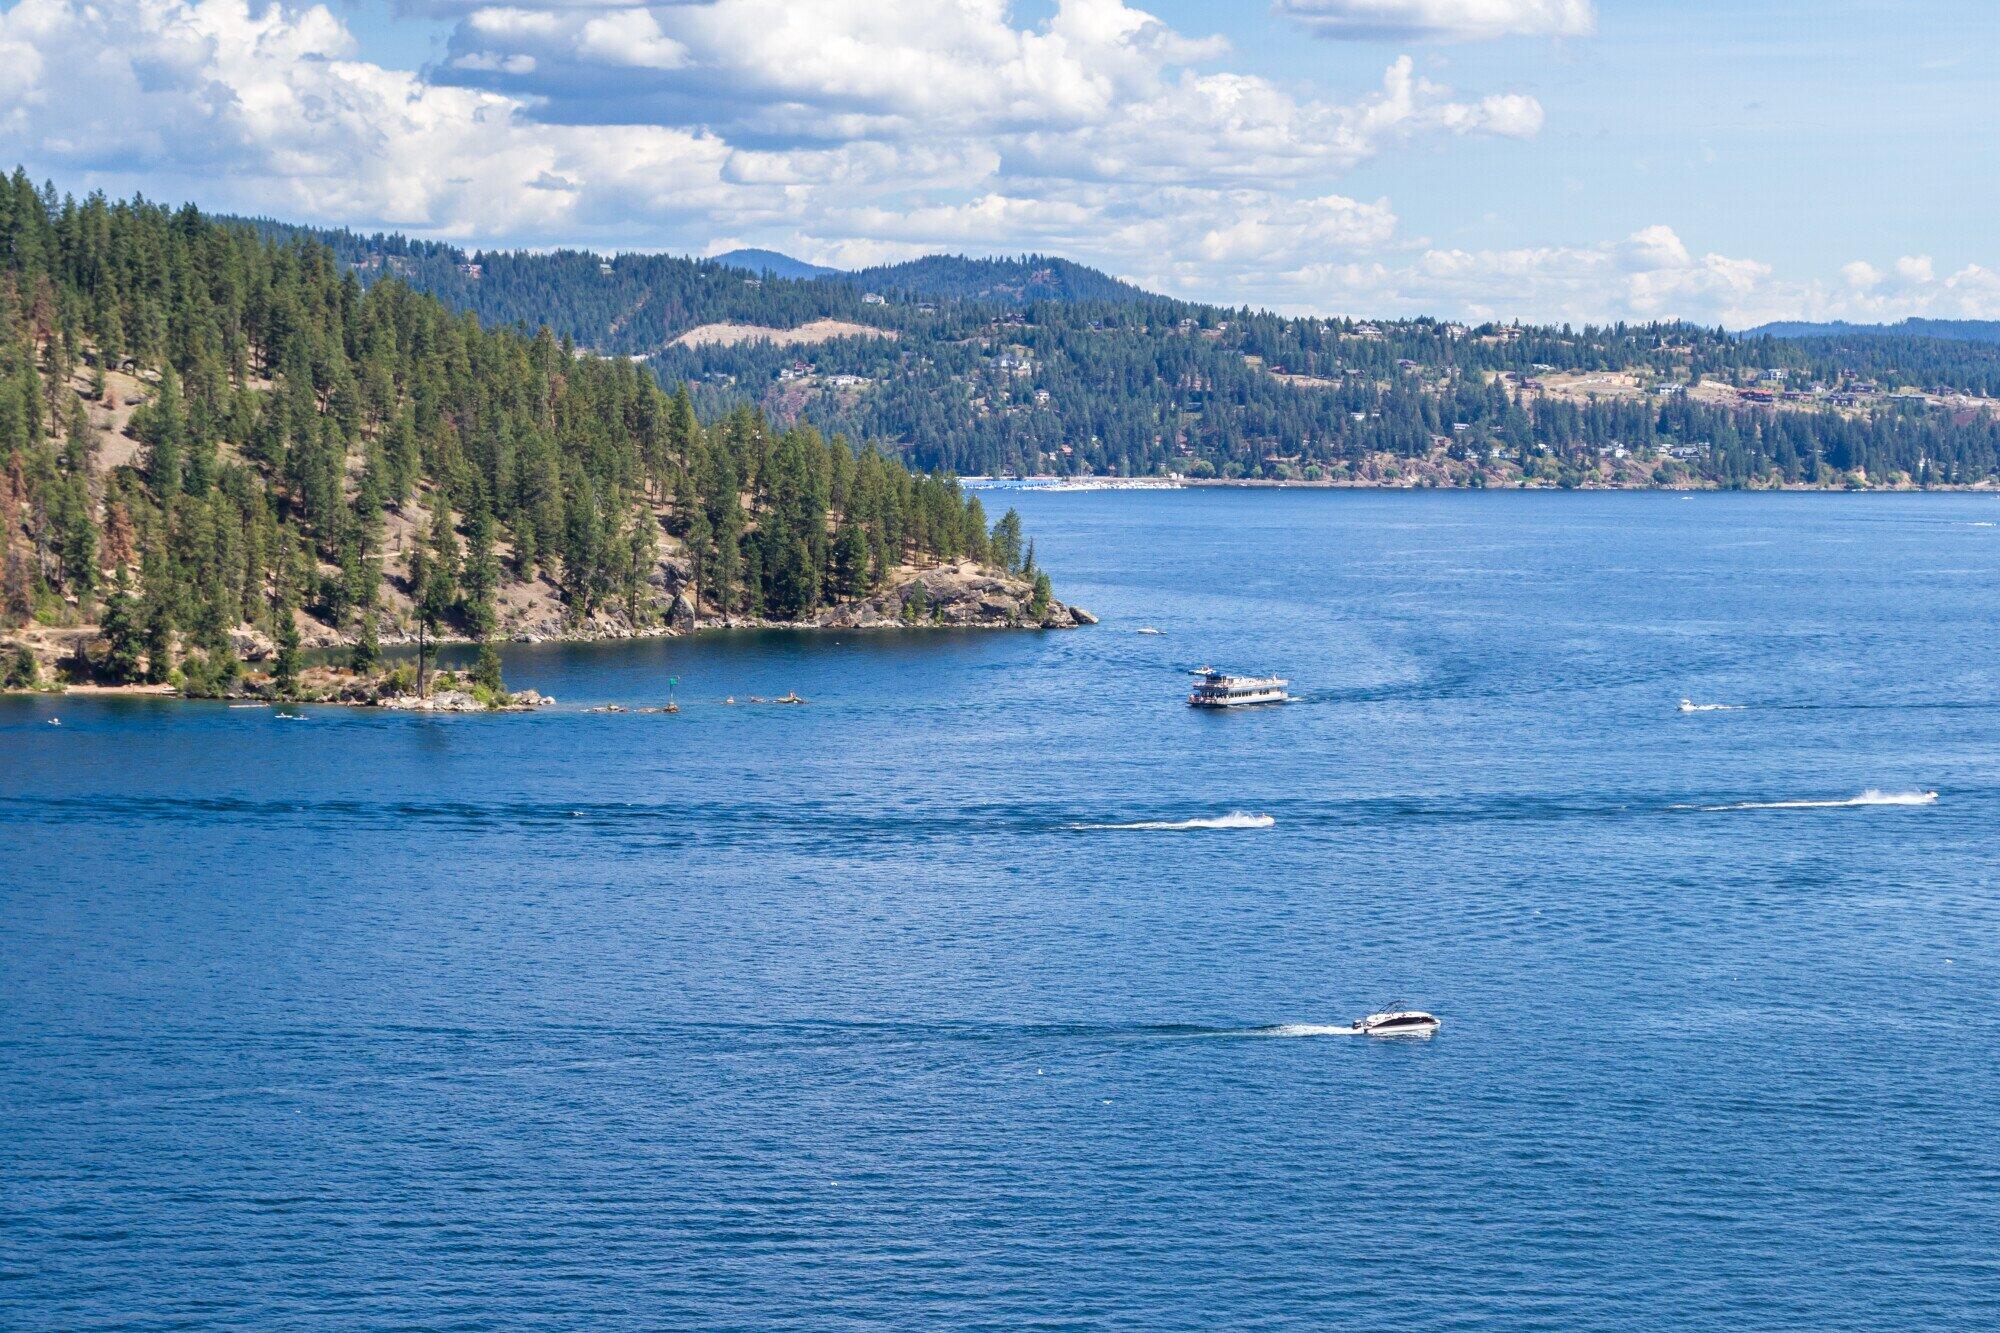 Coeur d'Alene Real Estate Investing: Which Neighborhoods Should You Invest In?